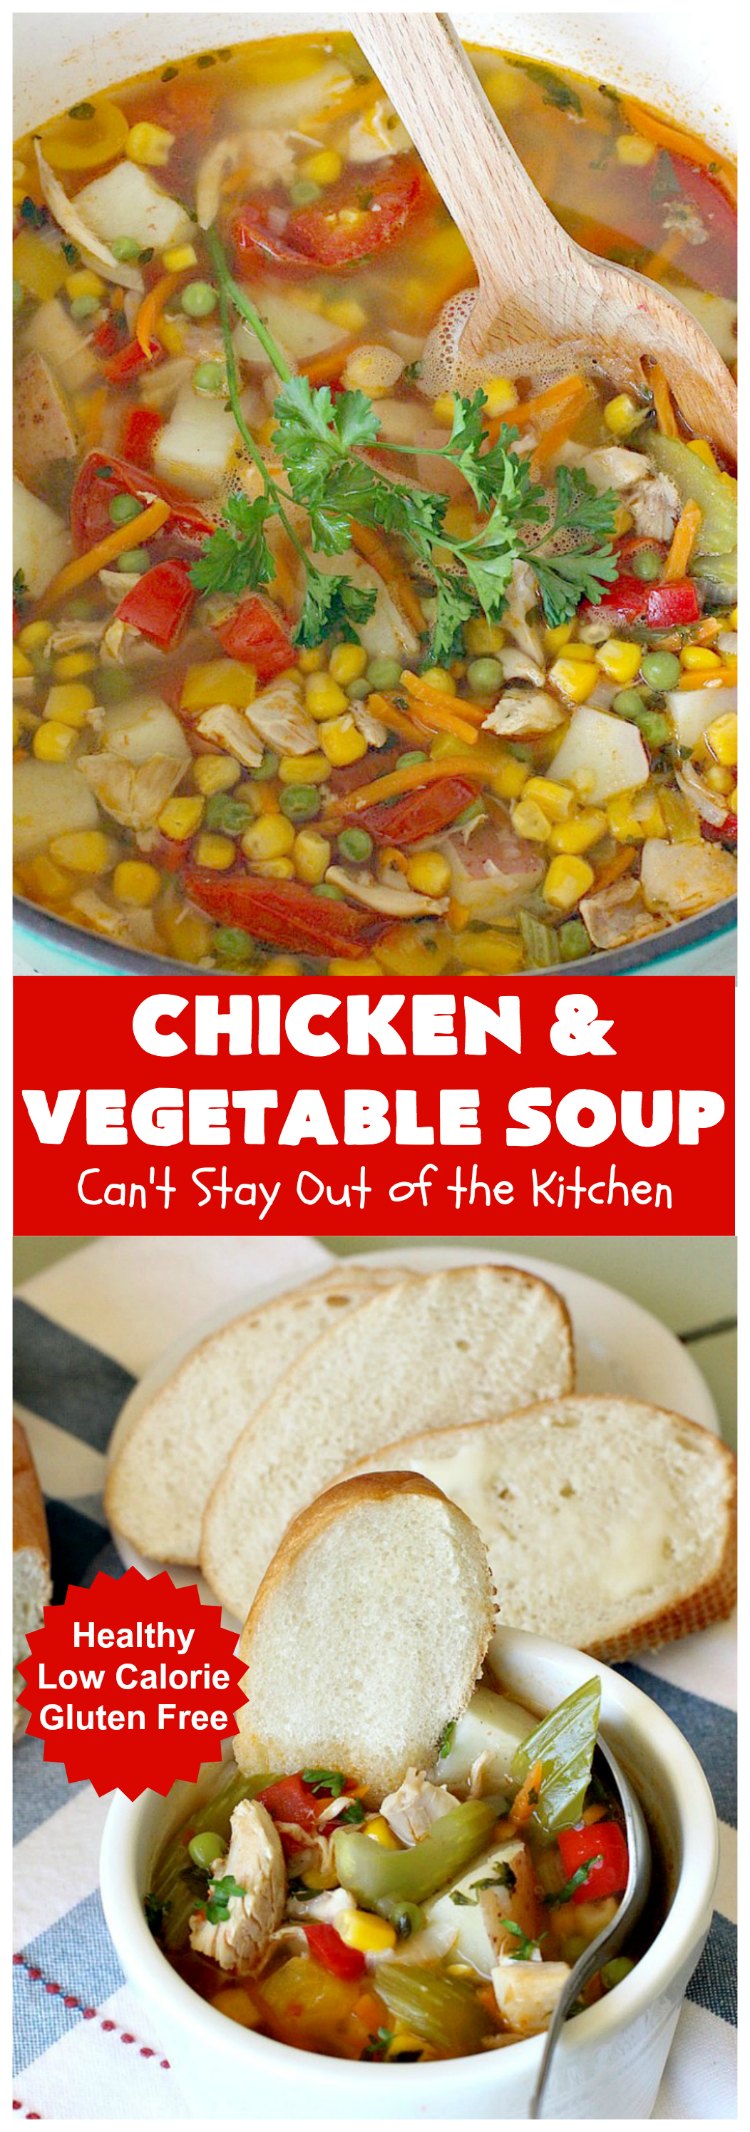 Chicken and Vegetable Soup | Can't Stay Out of the Kitchen